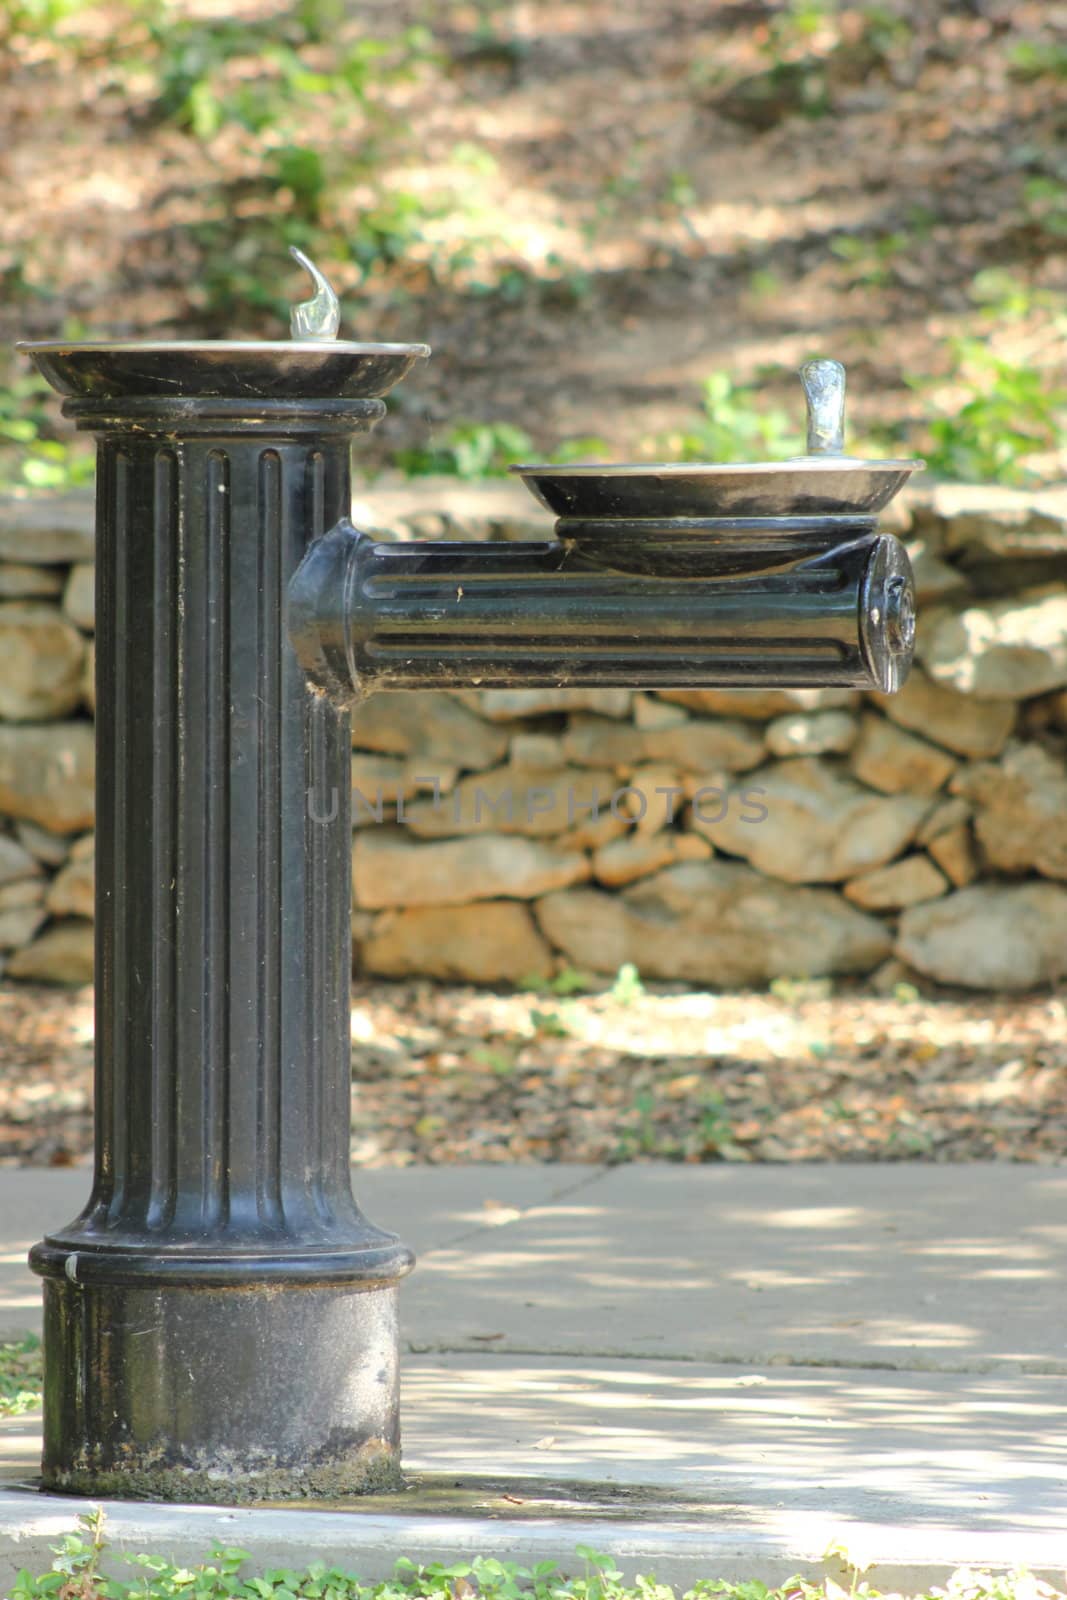 Antique water fountain at a park